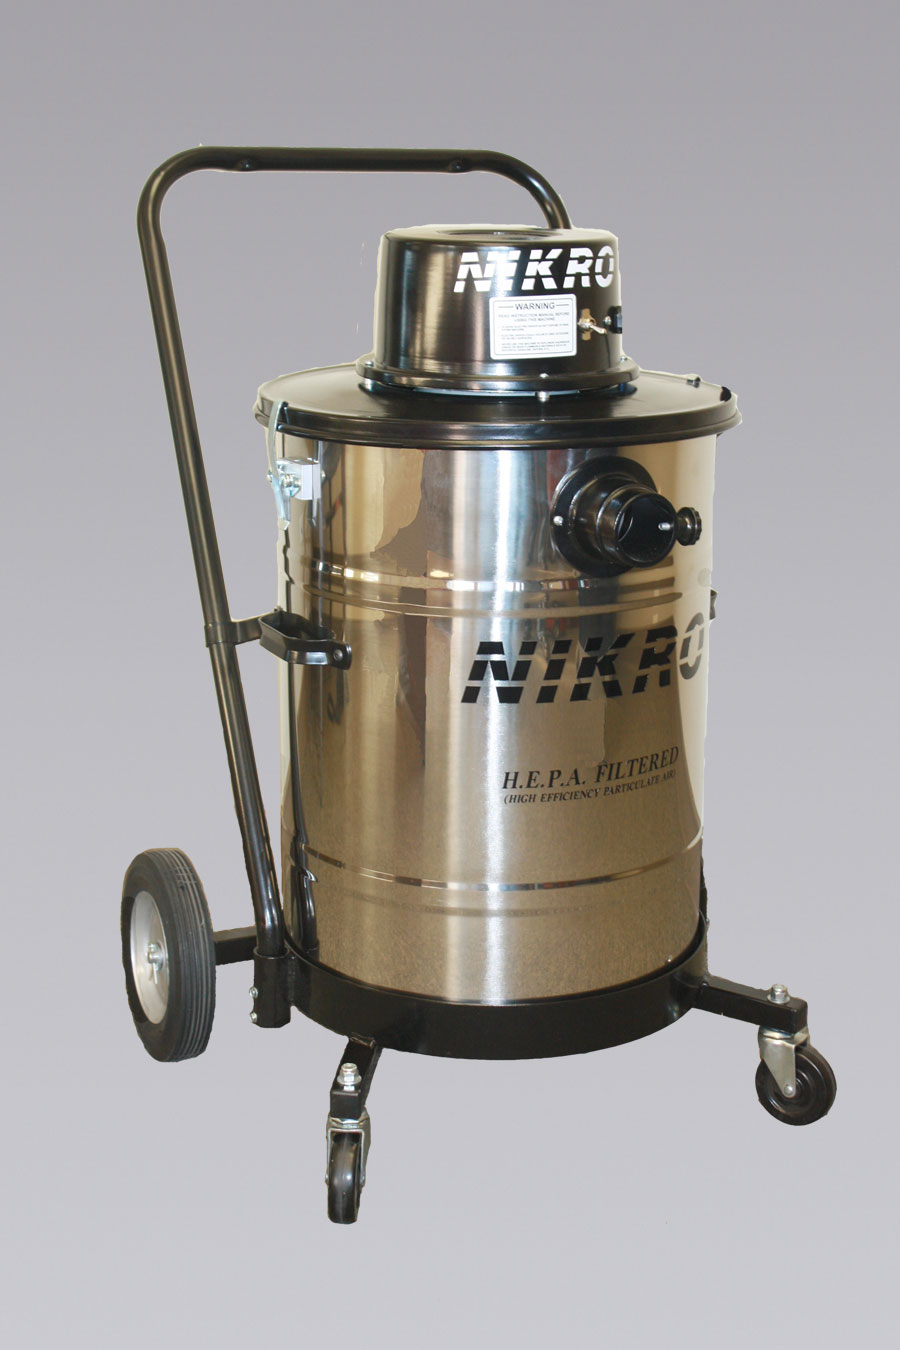 NIKRO HD15110-S - 15 Gallon Stainless Steel HEPA Vacuum (Dry) - H.E.P.A. Filtered Vacuums 
        